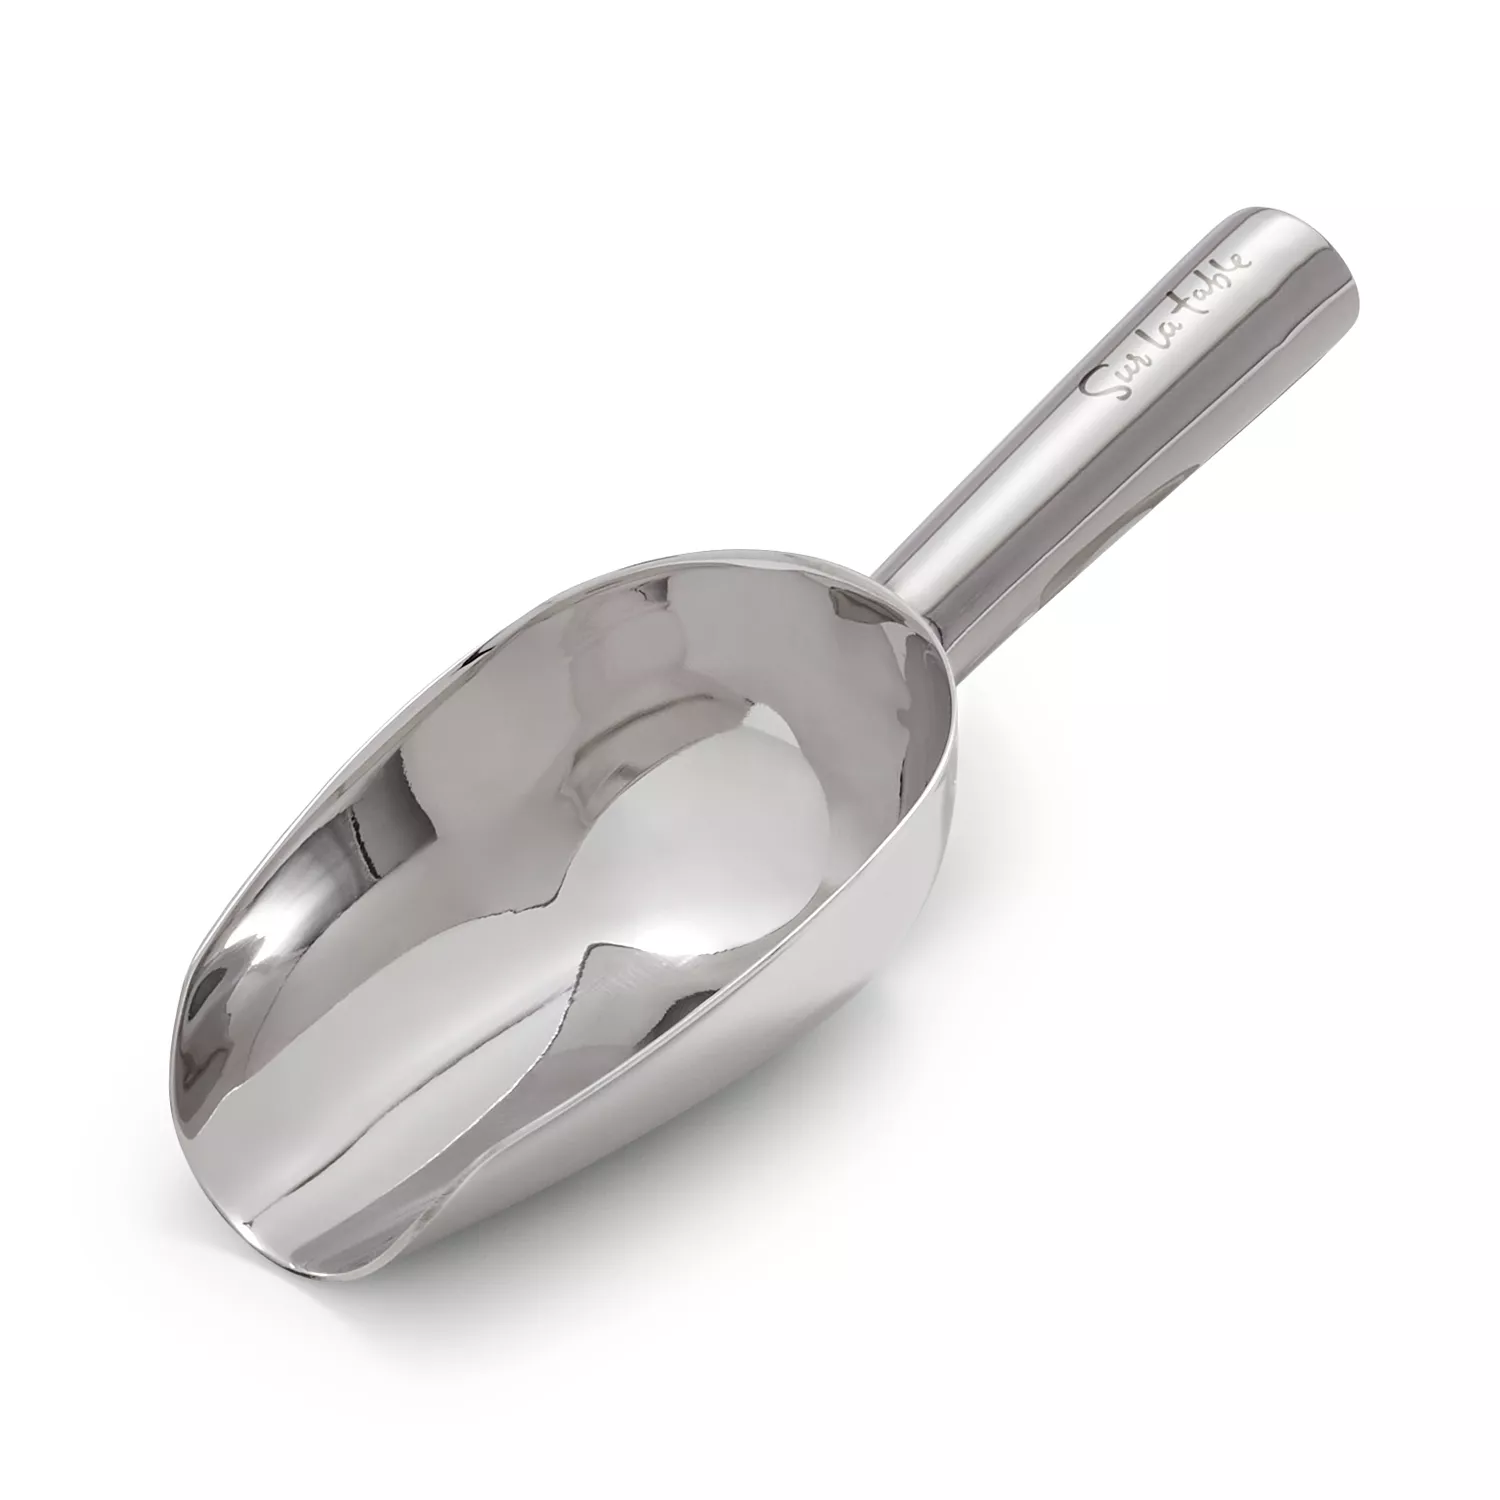 Wilton Stainless Steel Small Cookie Scoop, Silver